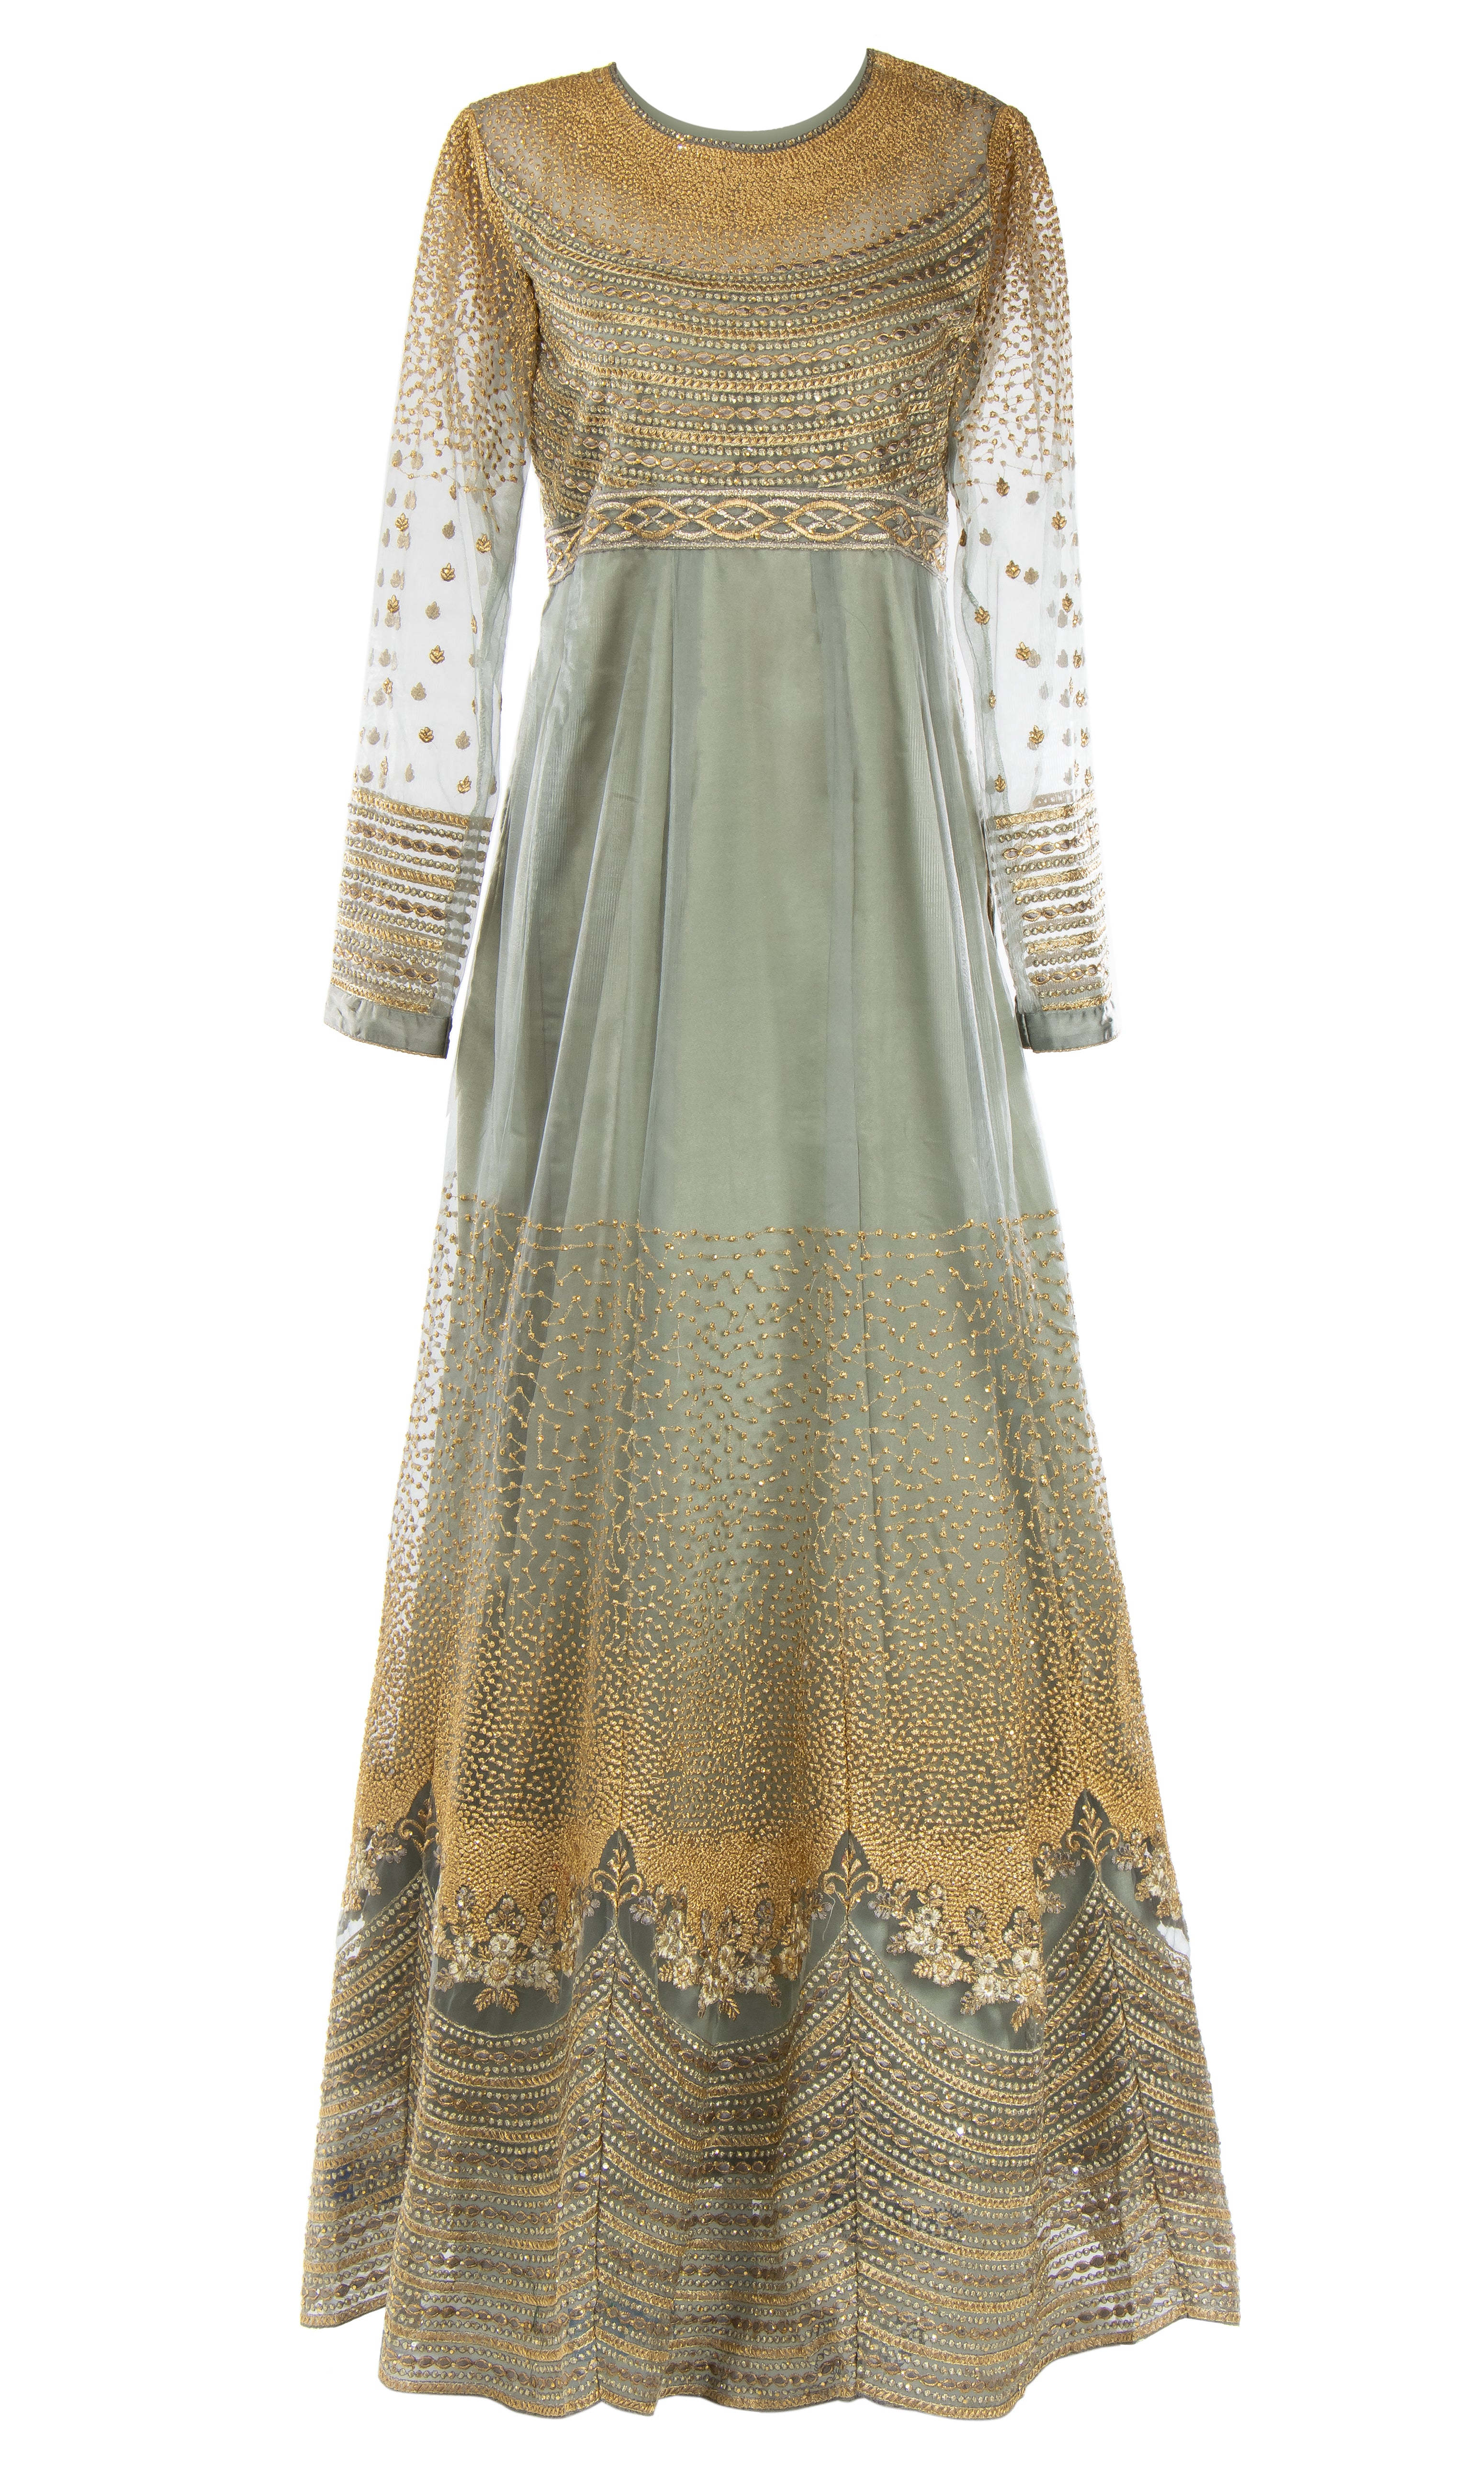 A floor-length grey dress with full net sleeves and a dupatta in the same material.